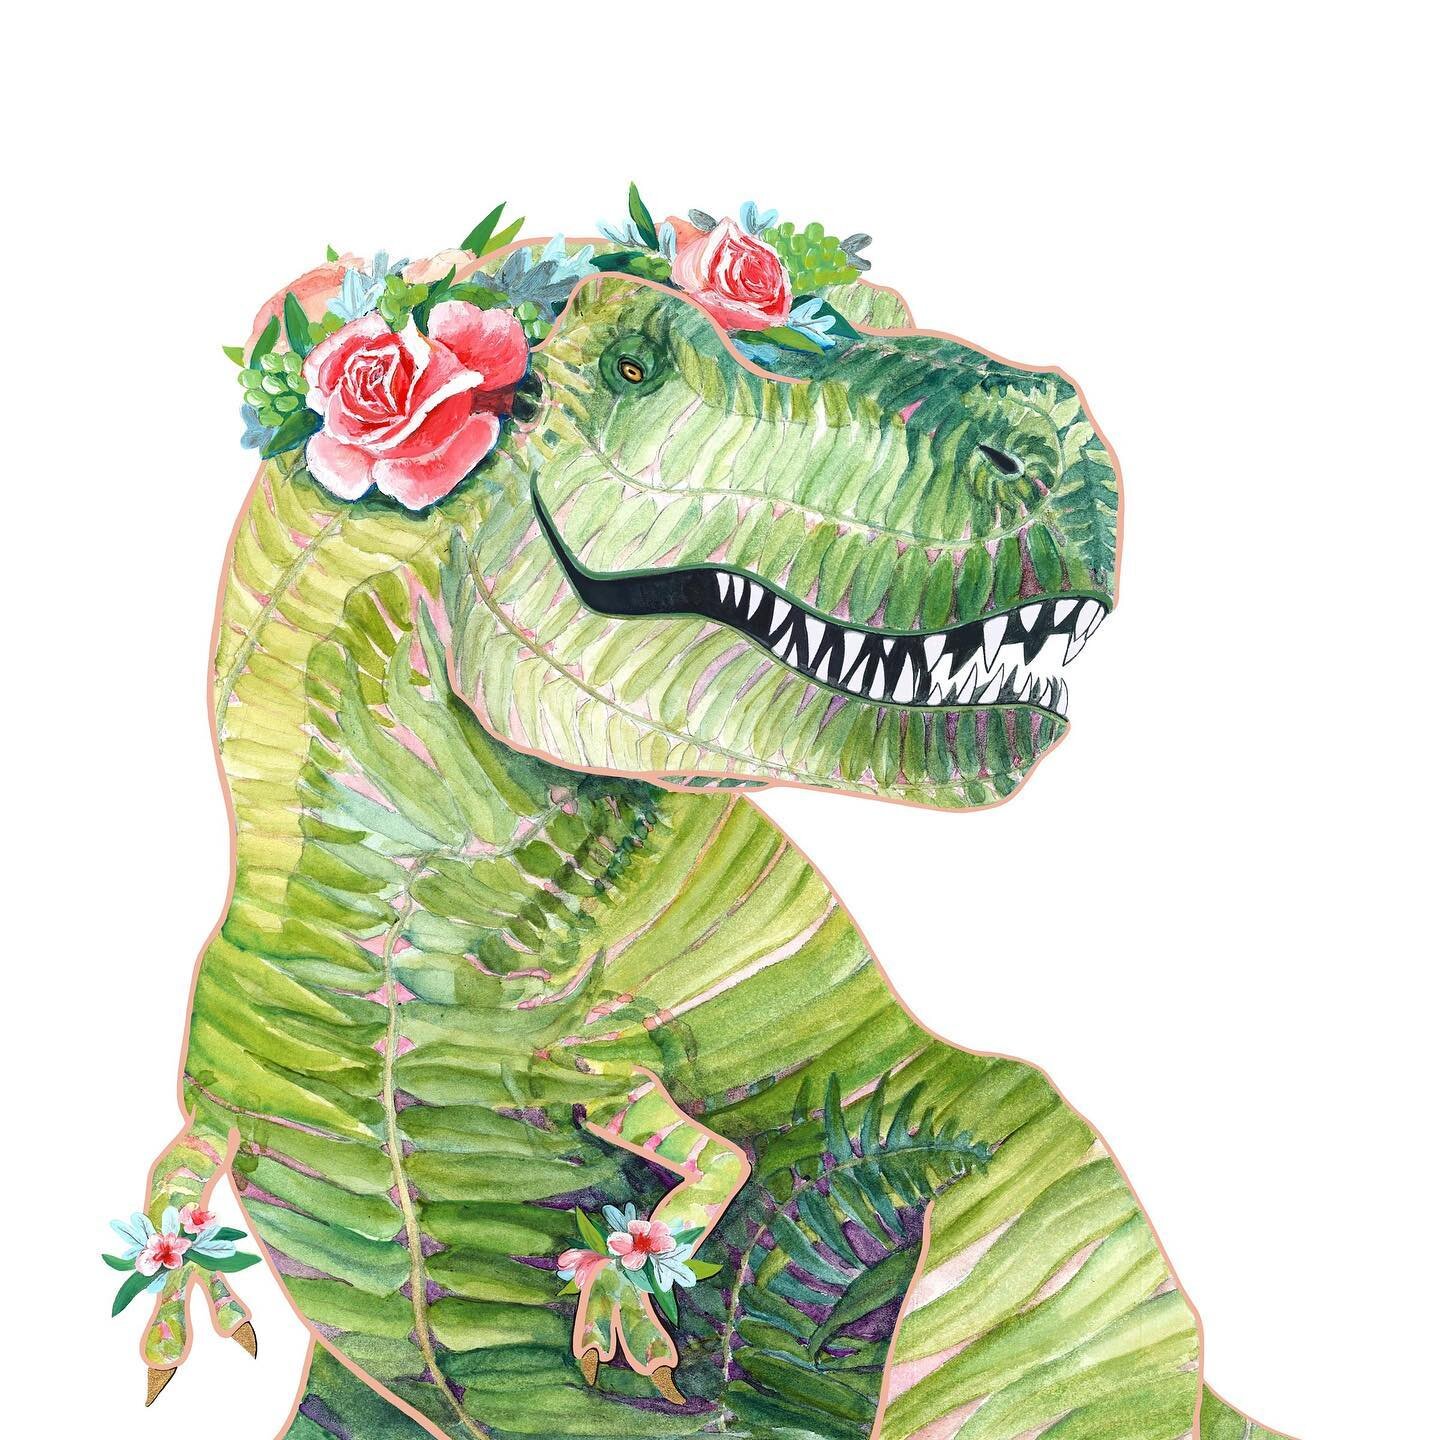 It all began with a &ldquo;portrait&rdquo; of fern covered T-Rex wearing lei po&rsquo;o 🌿
.
We had half as many children, which meant I could occasionally pull out a piece of paper during the daylight hours and watercolor. Daddy had just built the g